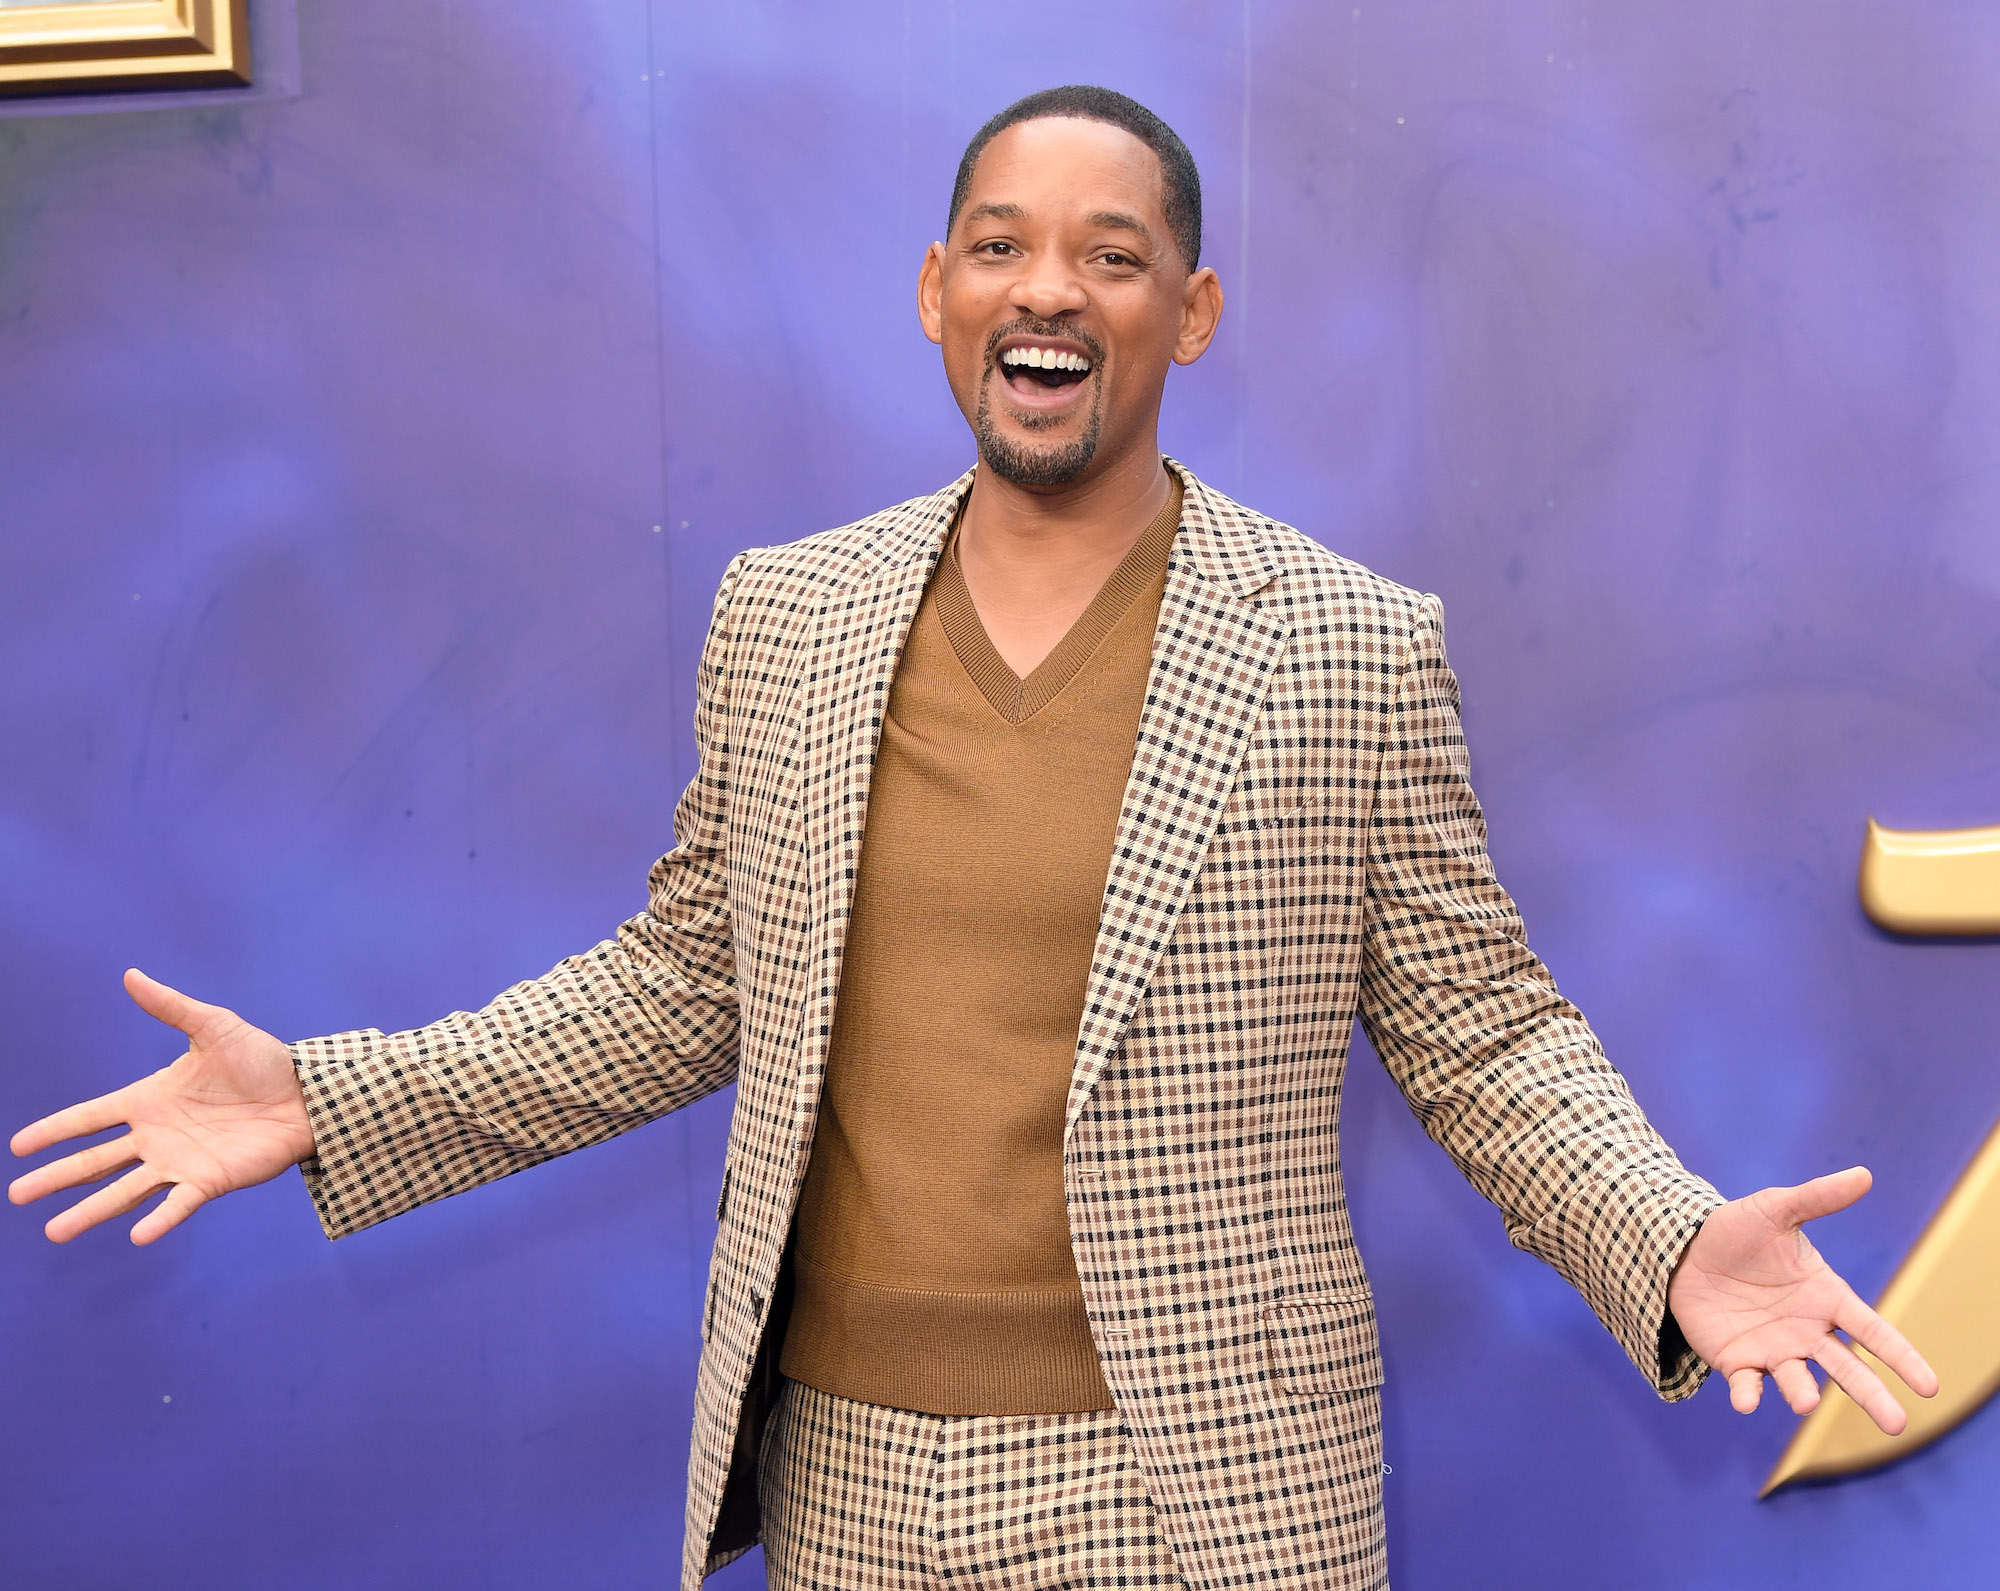 Will Smith smiling with his arms out